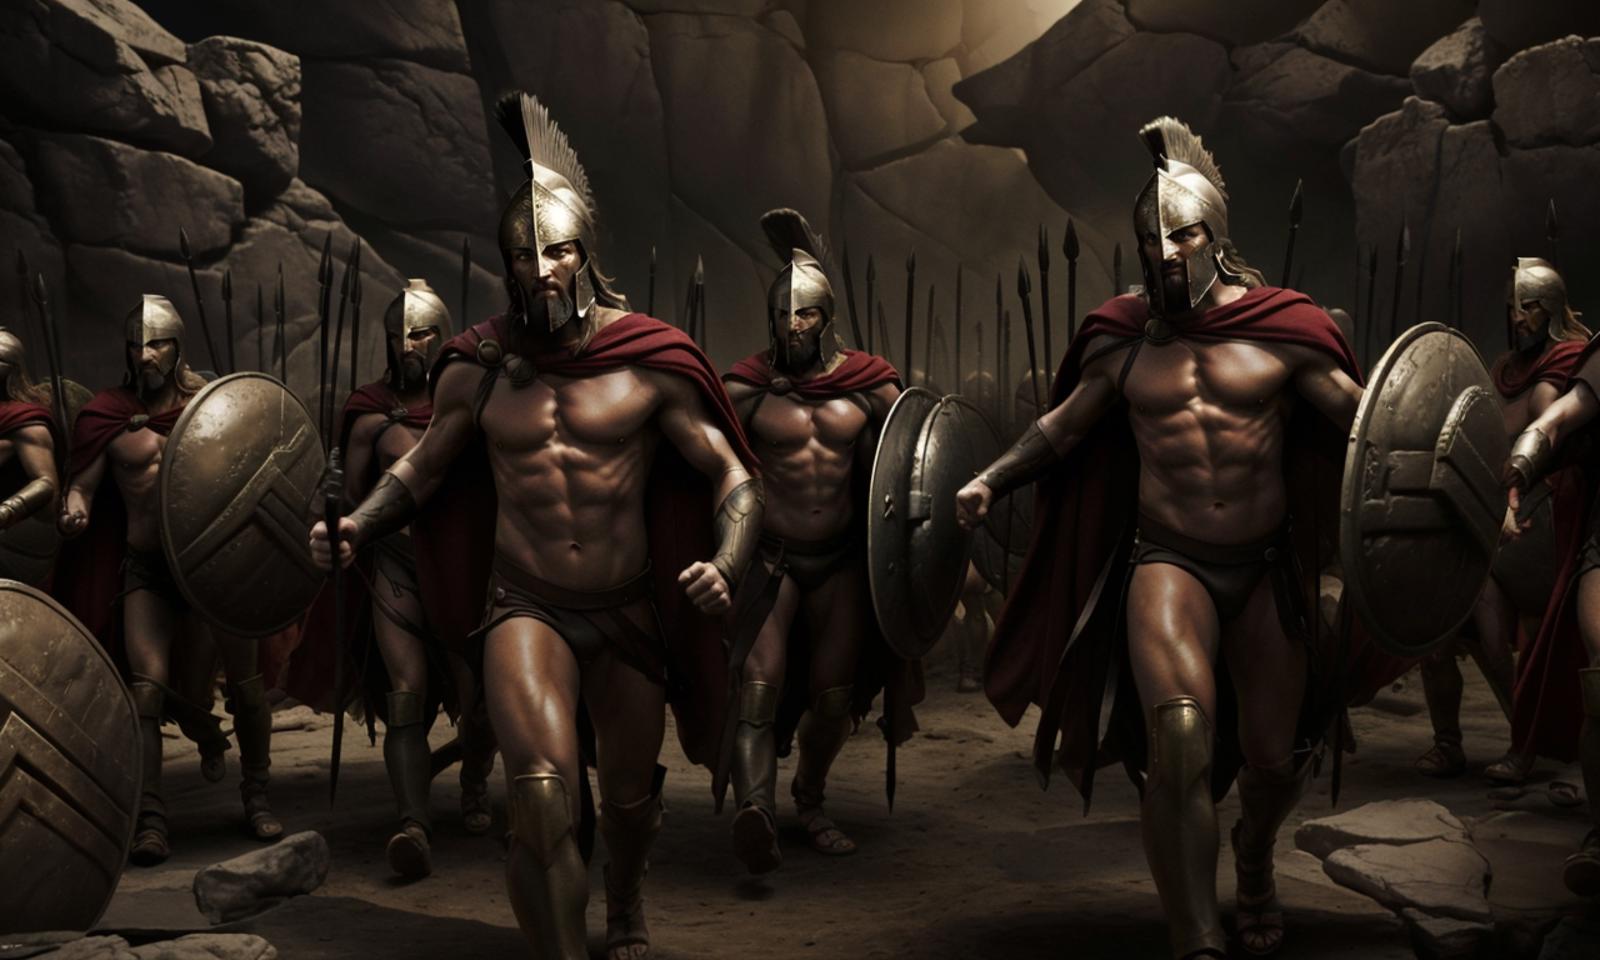 300 Spartans (300 movie concept) image by Wolf_Systems